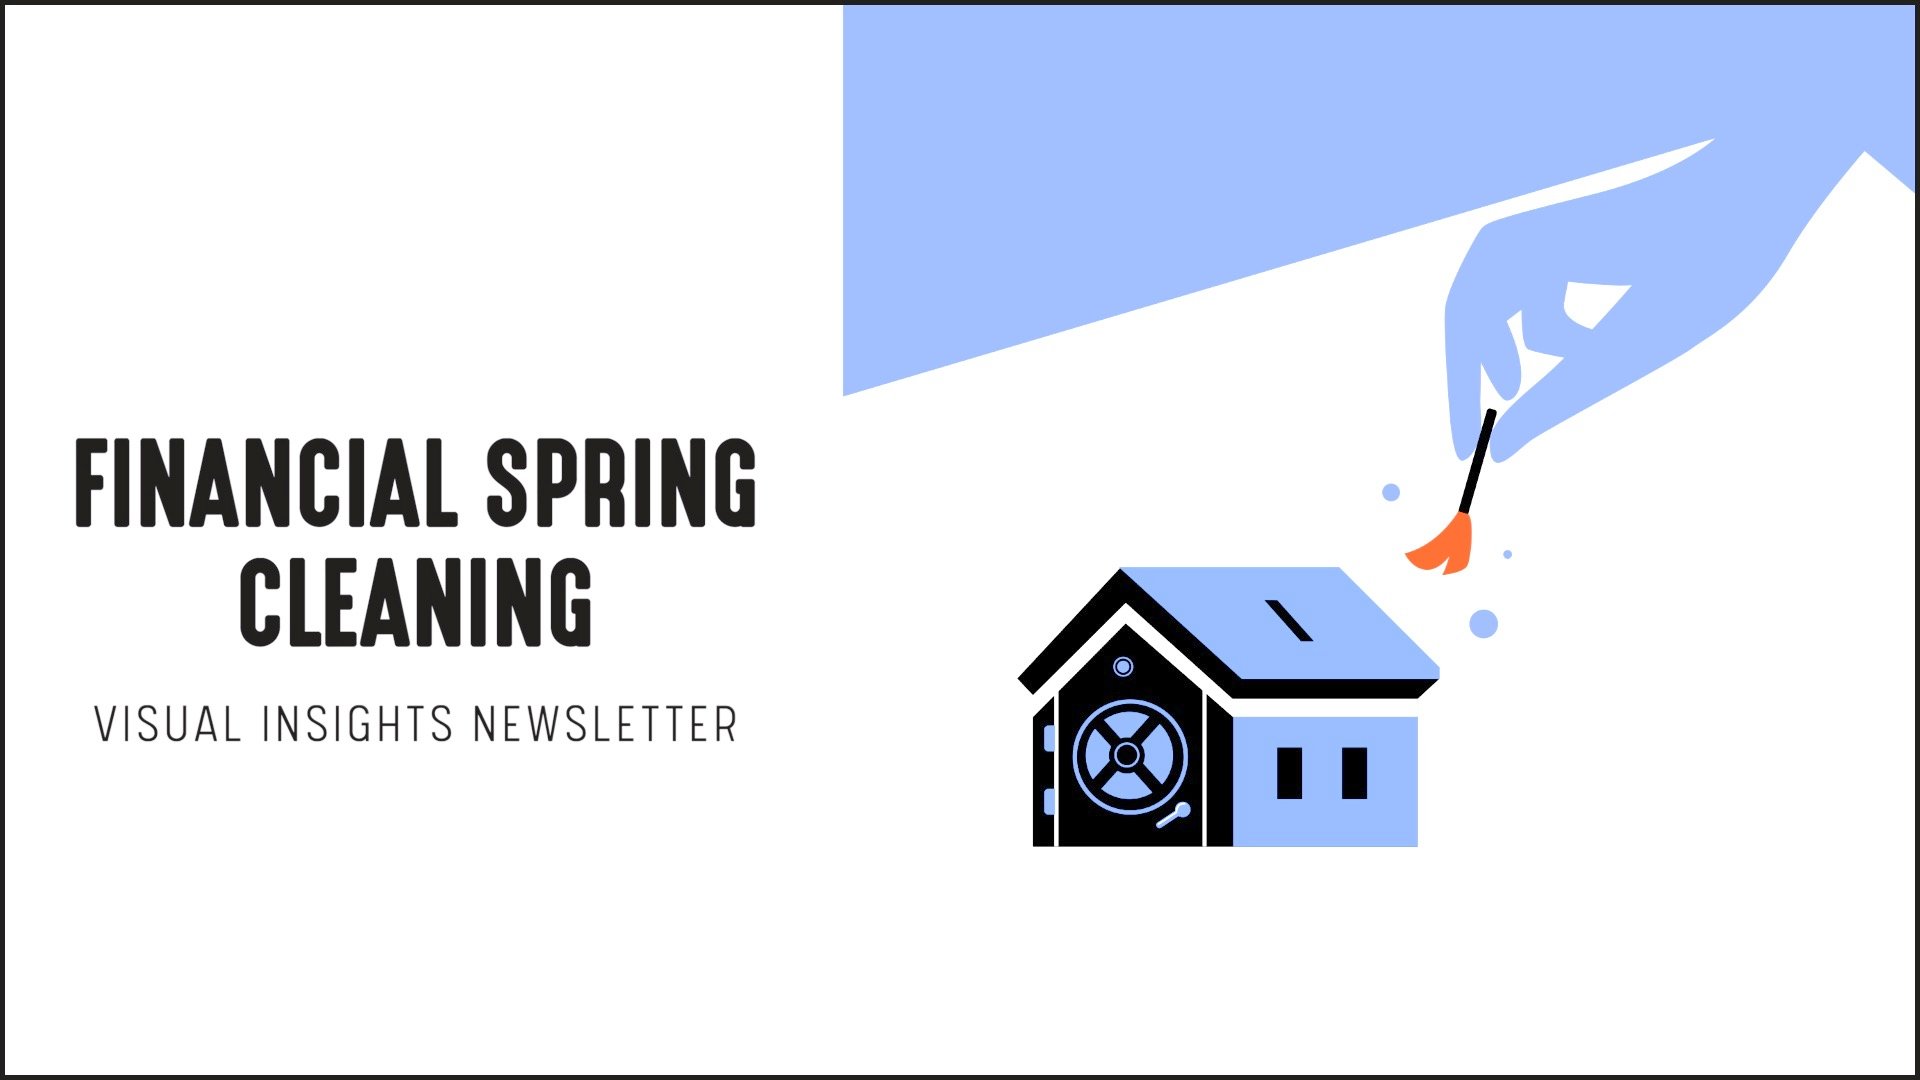 [NEW] Financial Spring Cleaning - Visual Insights Newsletter Marketing Campaigns for Financial Advisors